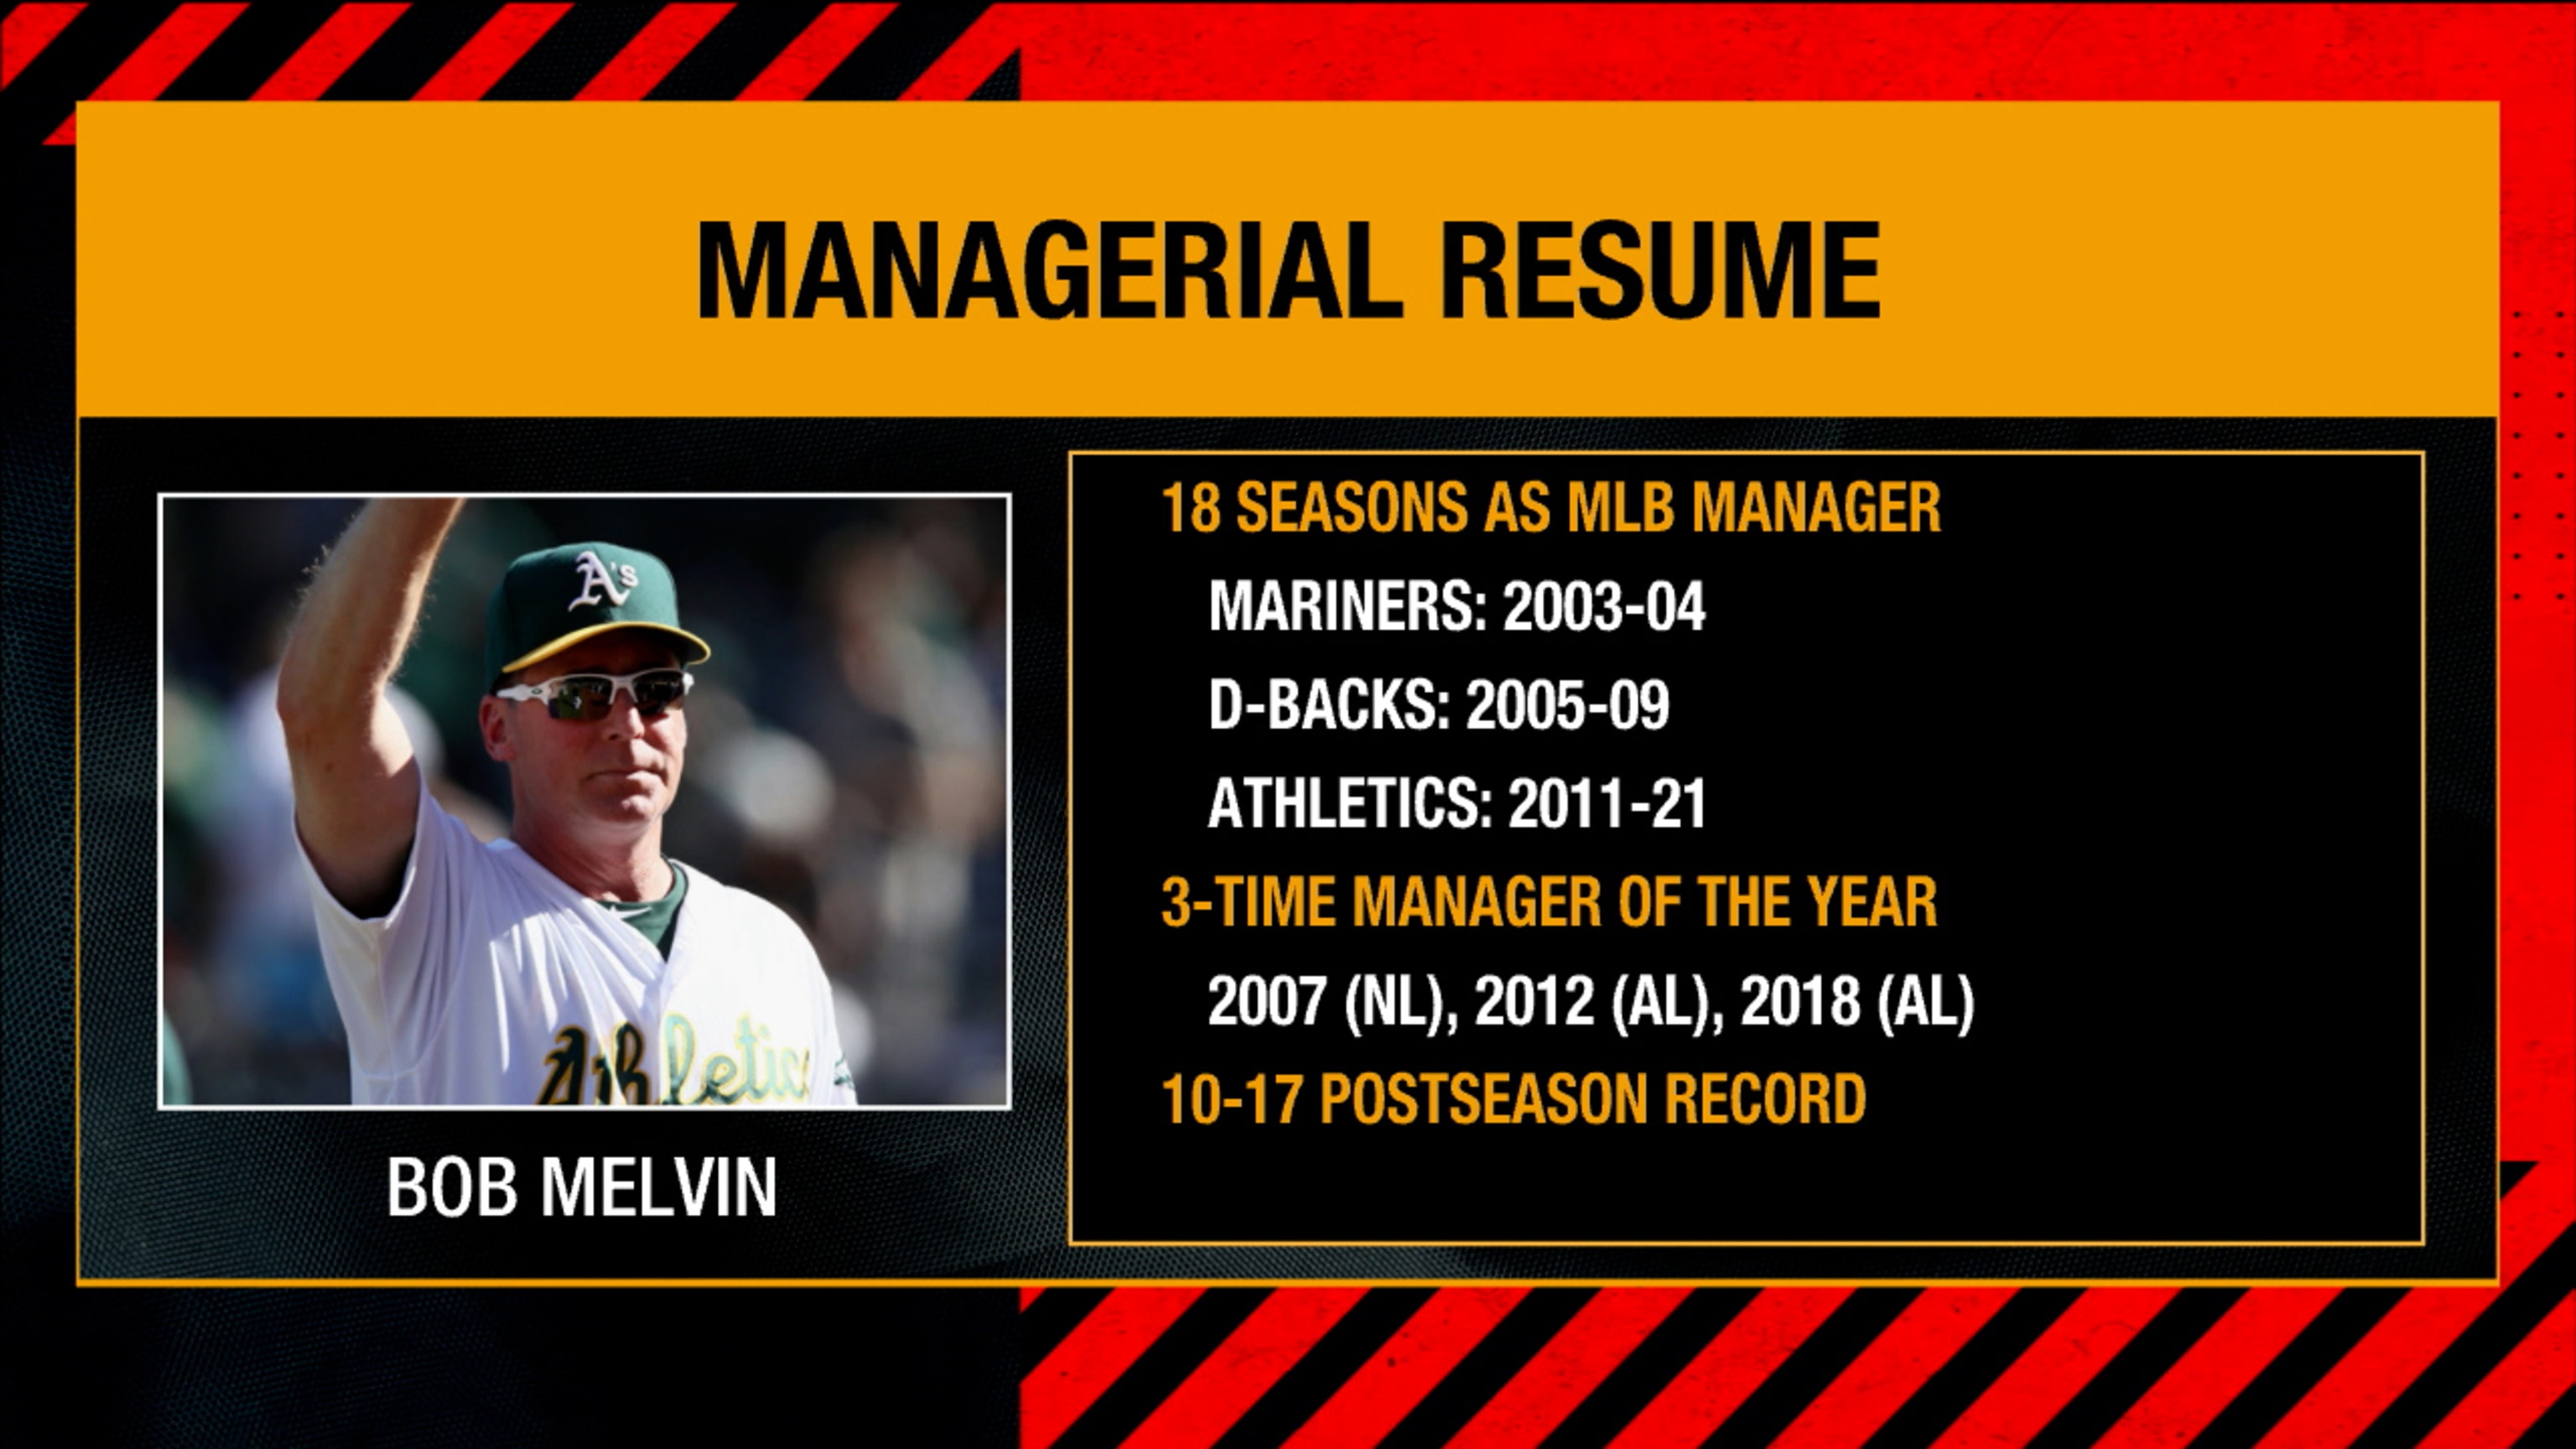 Padres hire Bob Melvin as manager